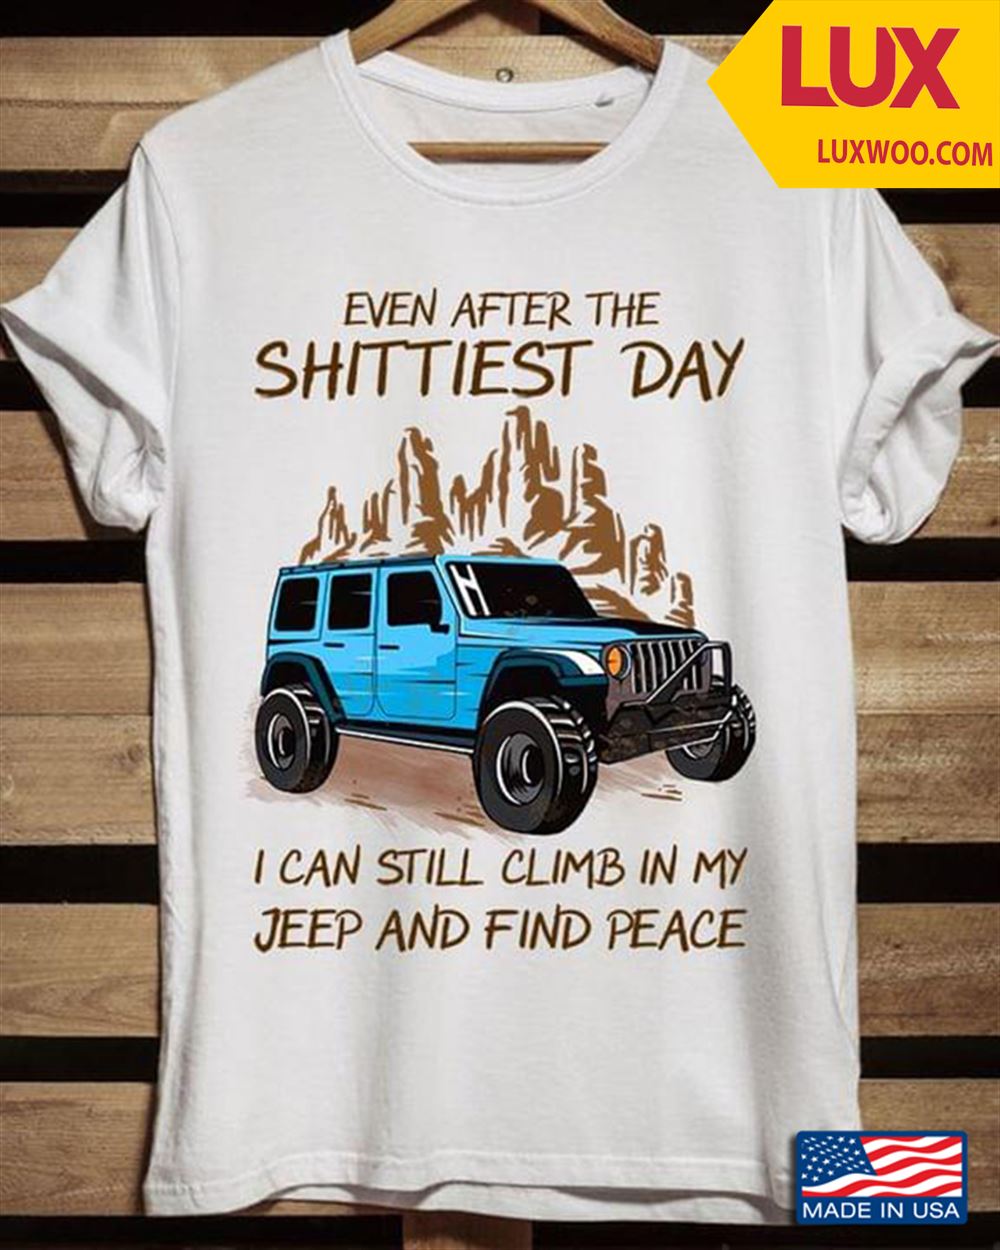 Even After The Shittiest Day I Can Still Climb In My Jeep And Find Peace Tshirt Size Up To 5xl